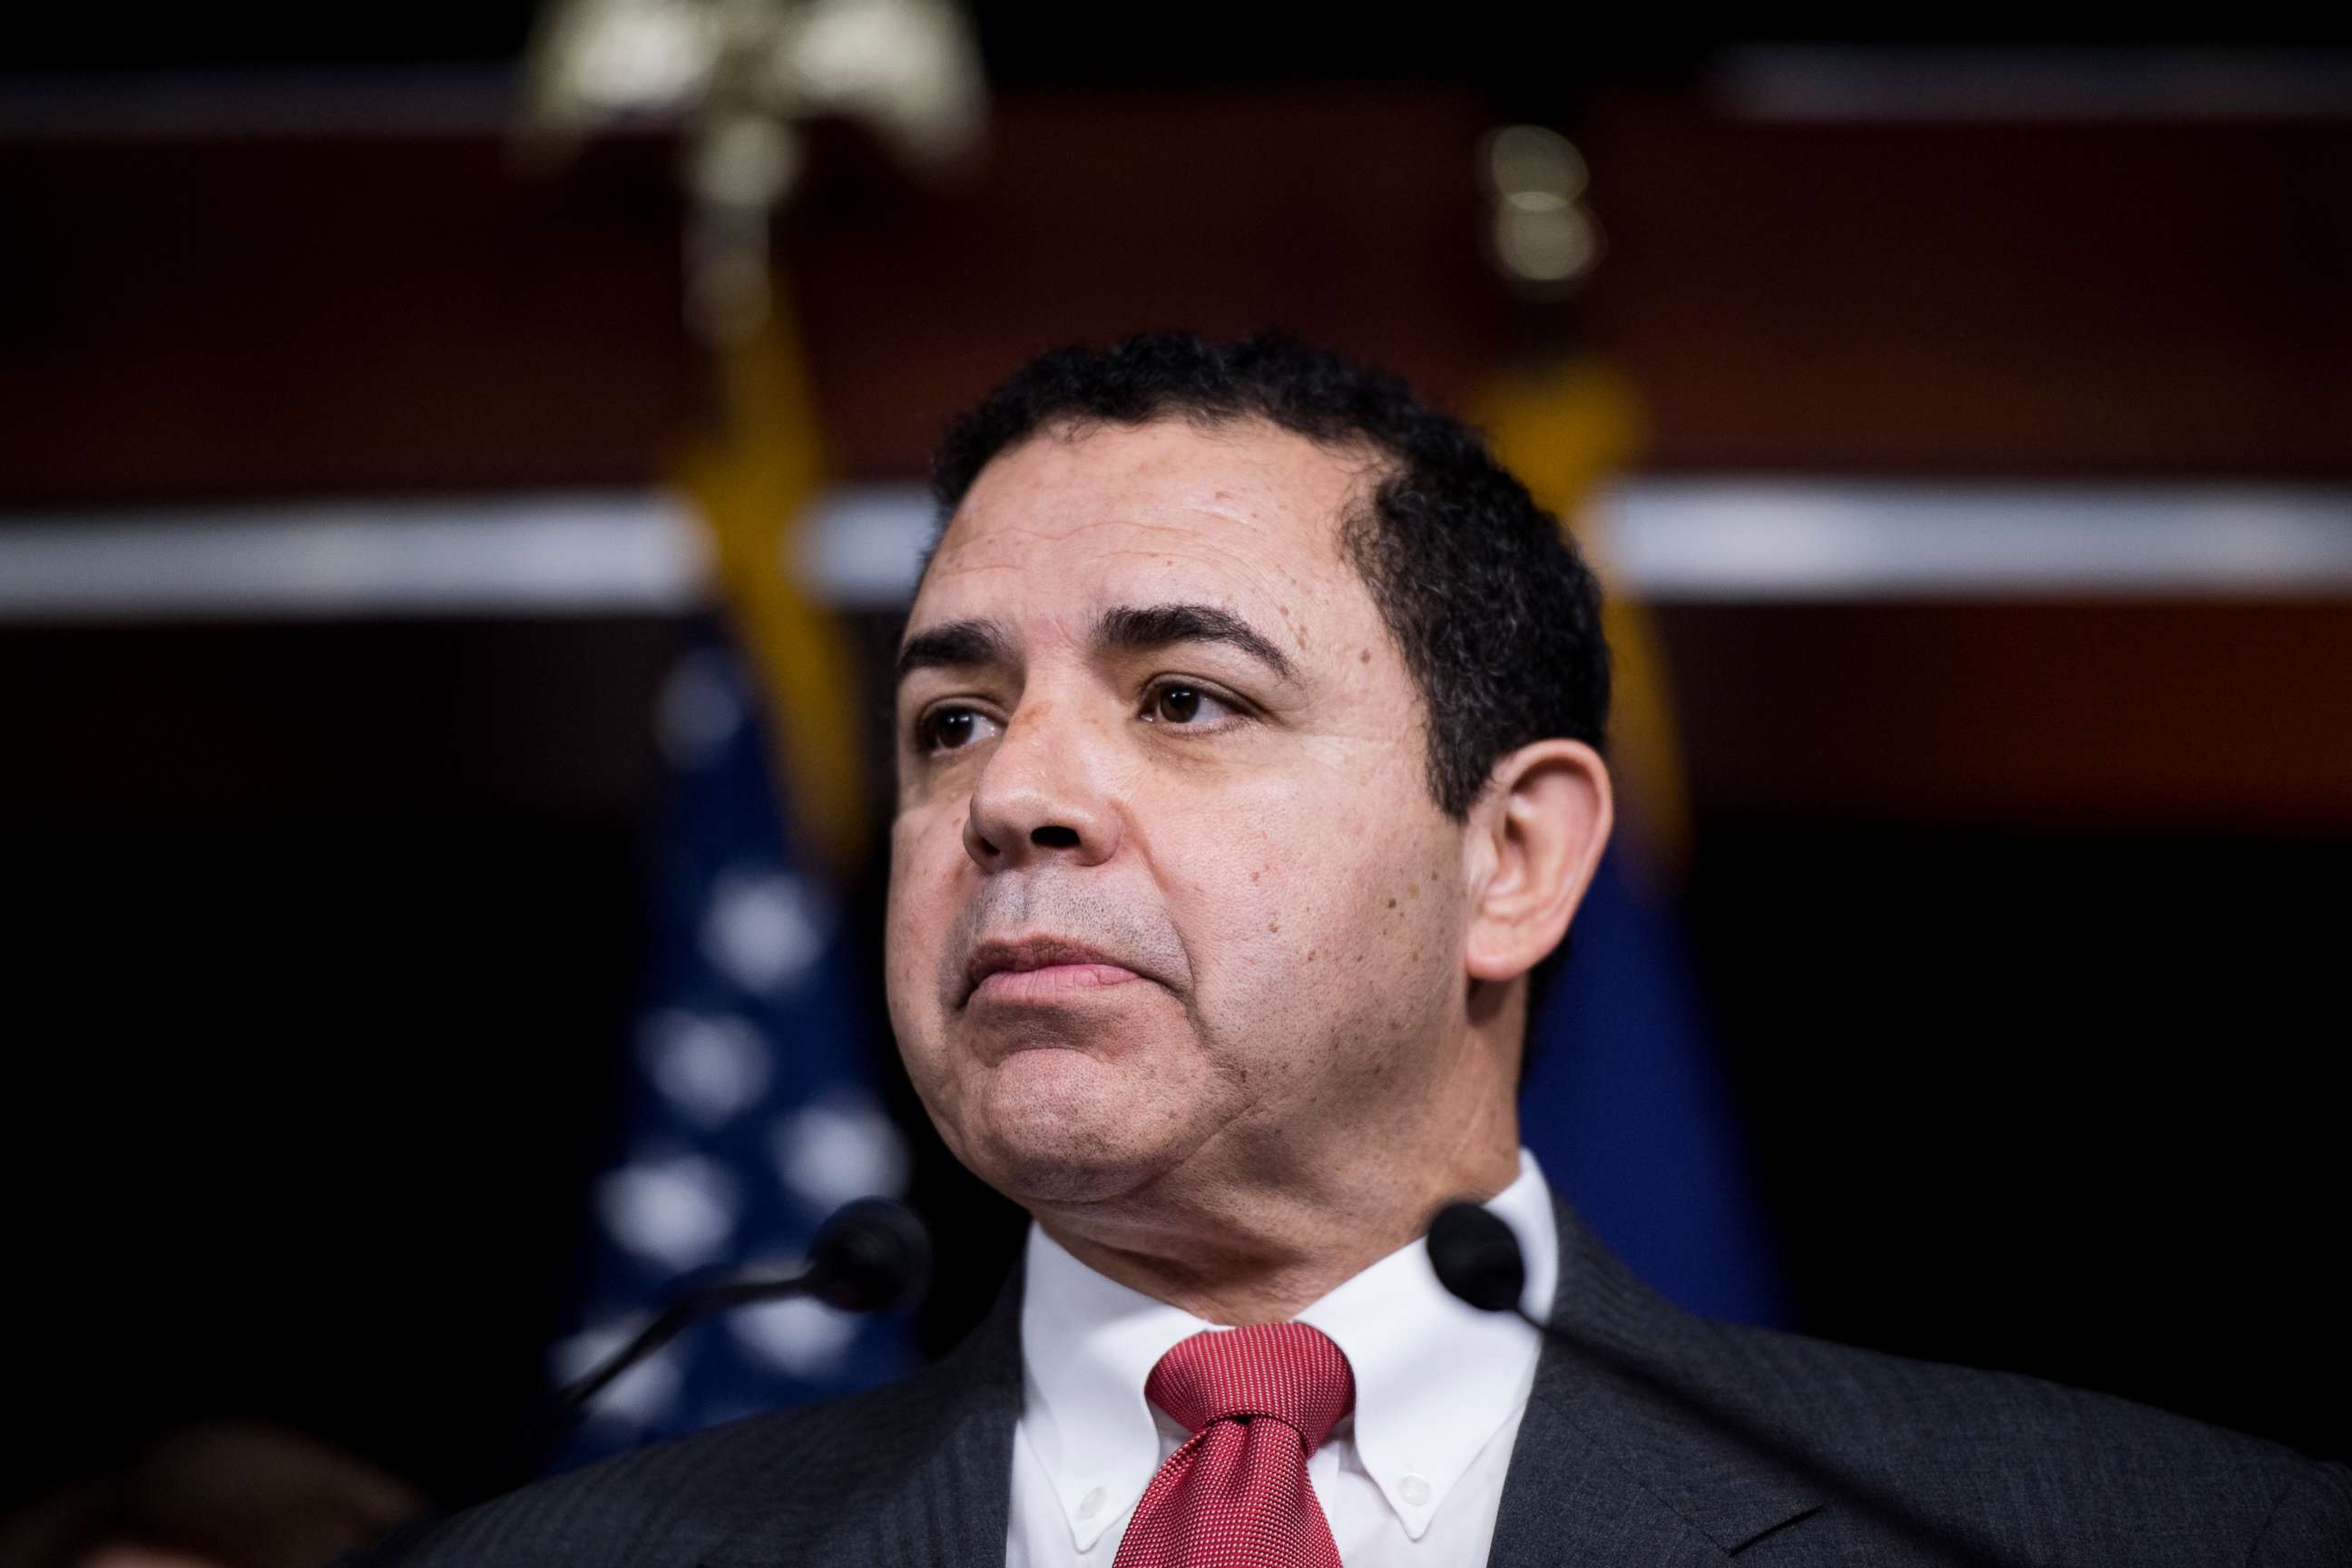 PHOTO: Rep. Henry Cuellar speaks during the House Democrats' news conference on their "A Better Deal" agenda, July 25, 2017.